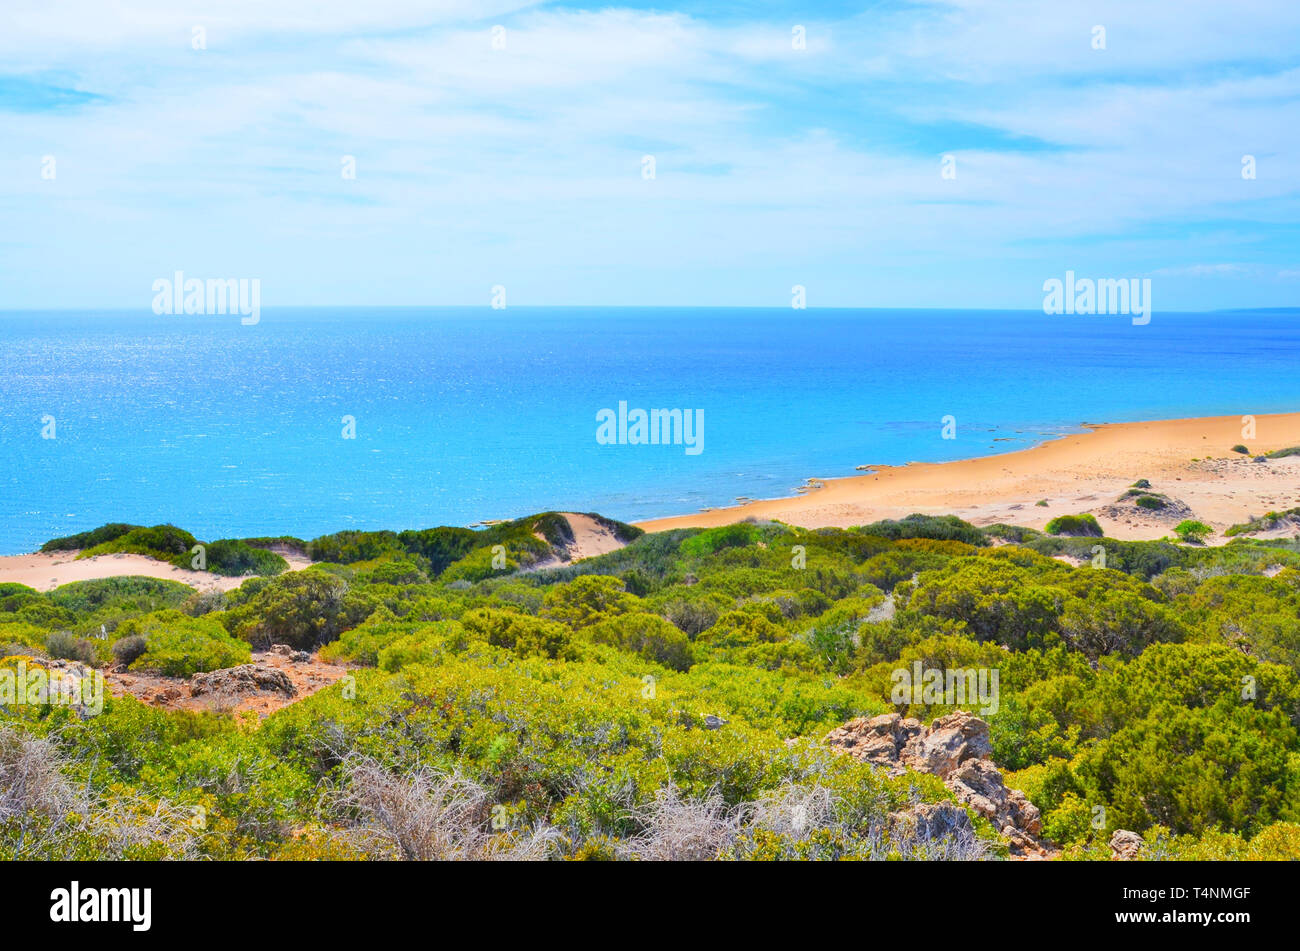 Amazing landscape with the bay on Mediterranean coast taken from the hills in Karpas Peninsula, Turkish Northern Cyprus. Amazing remote vacation spot. Stock Photo